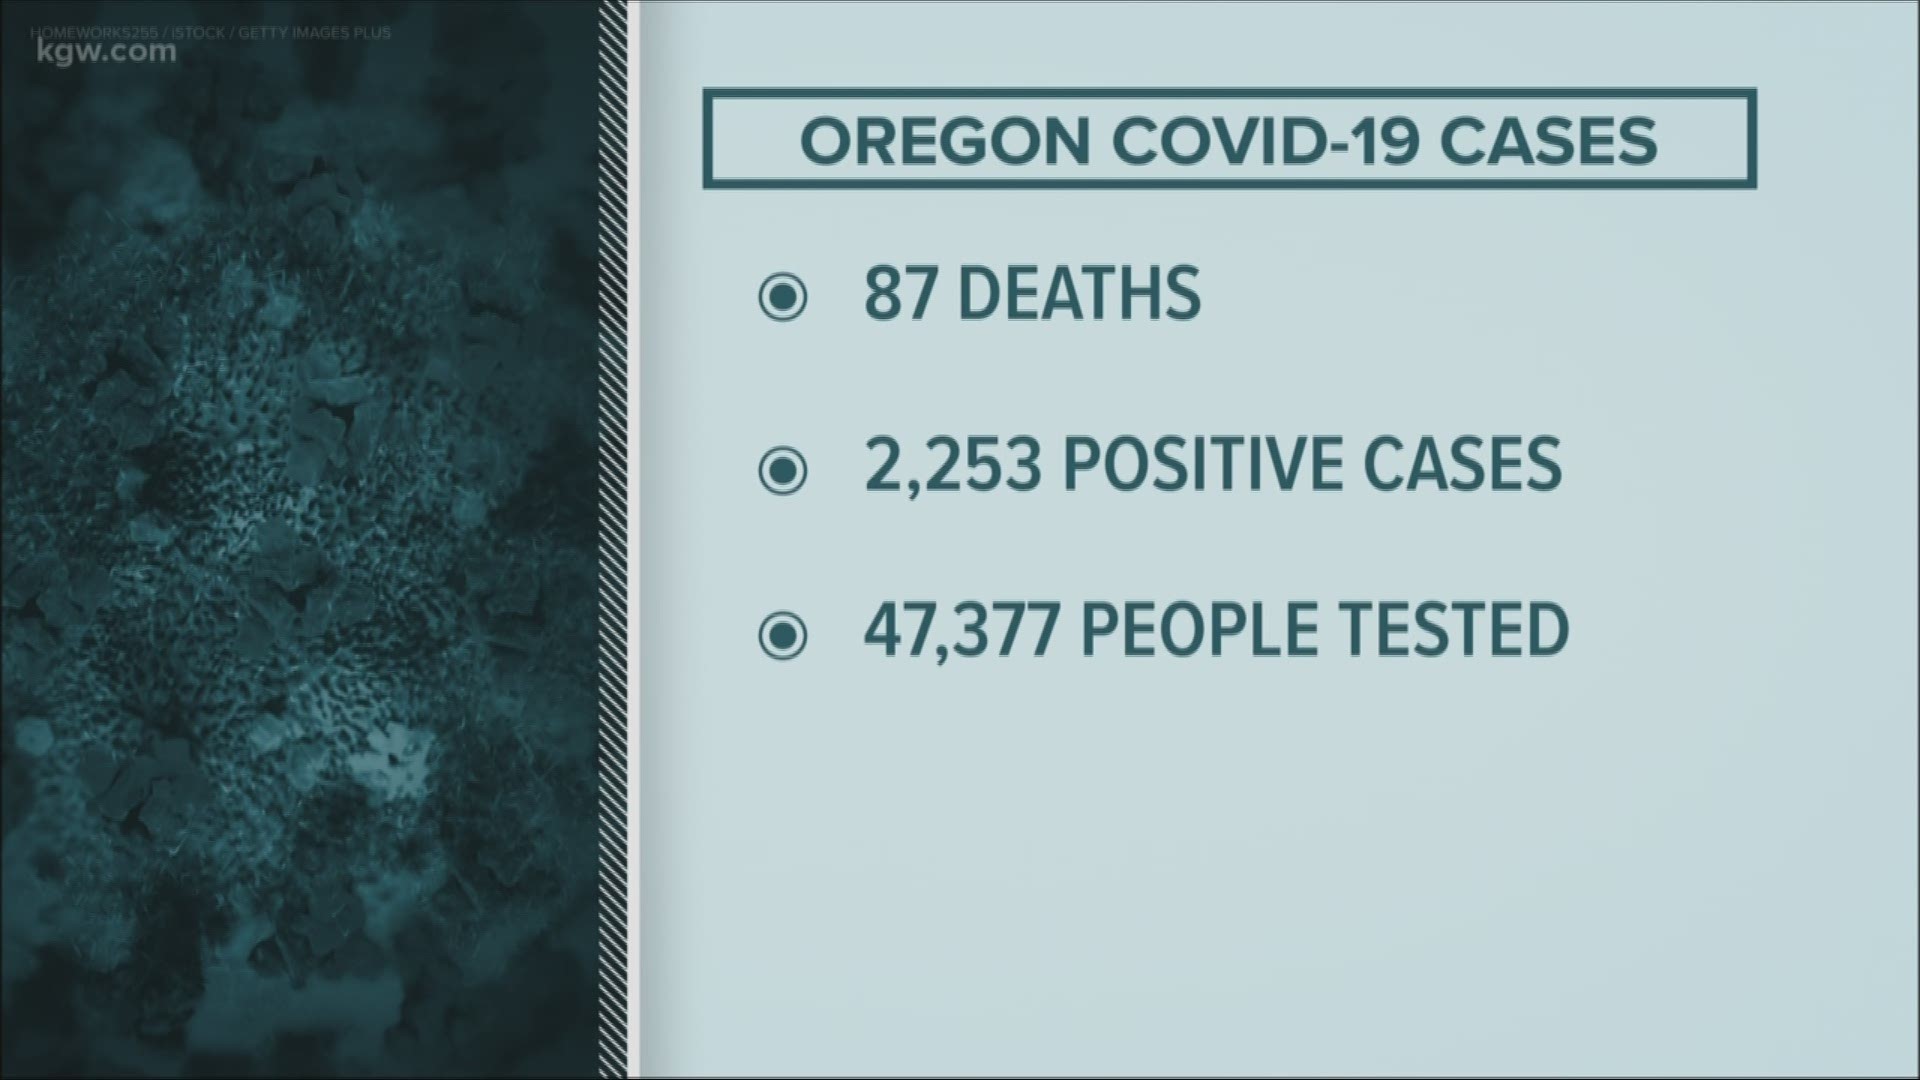 A total of 87 people have died in Oregon in COVID-19 and the total number of known positive cases is 2,253.